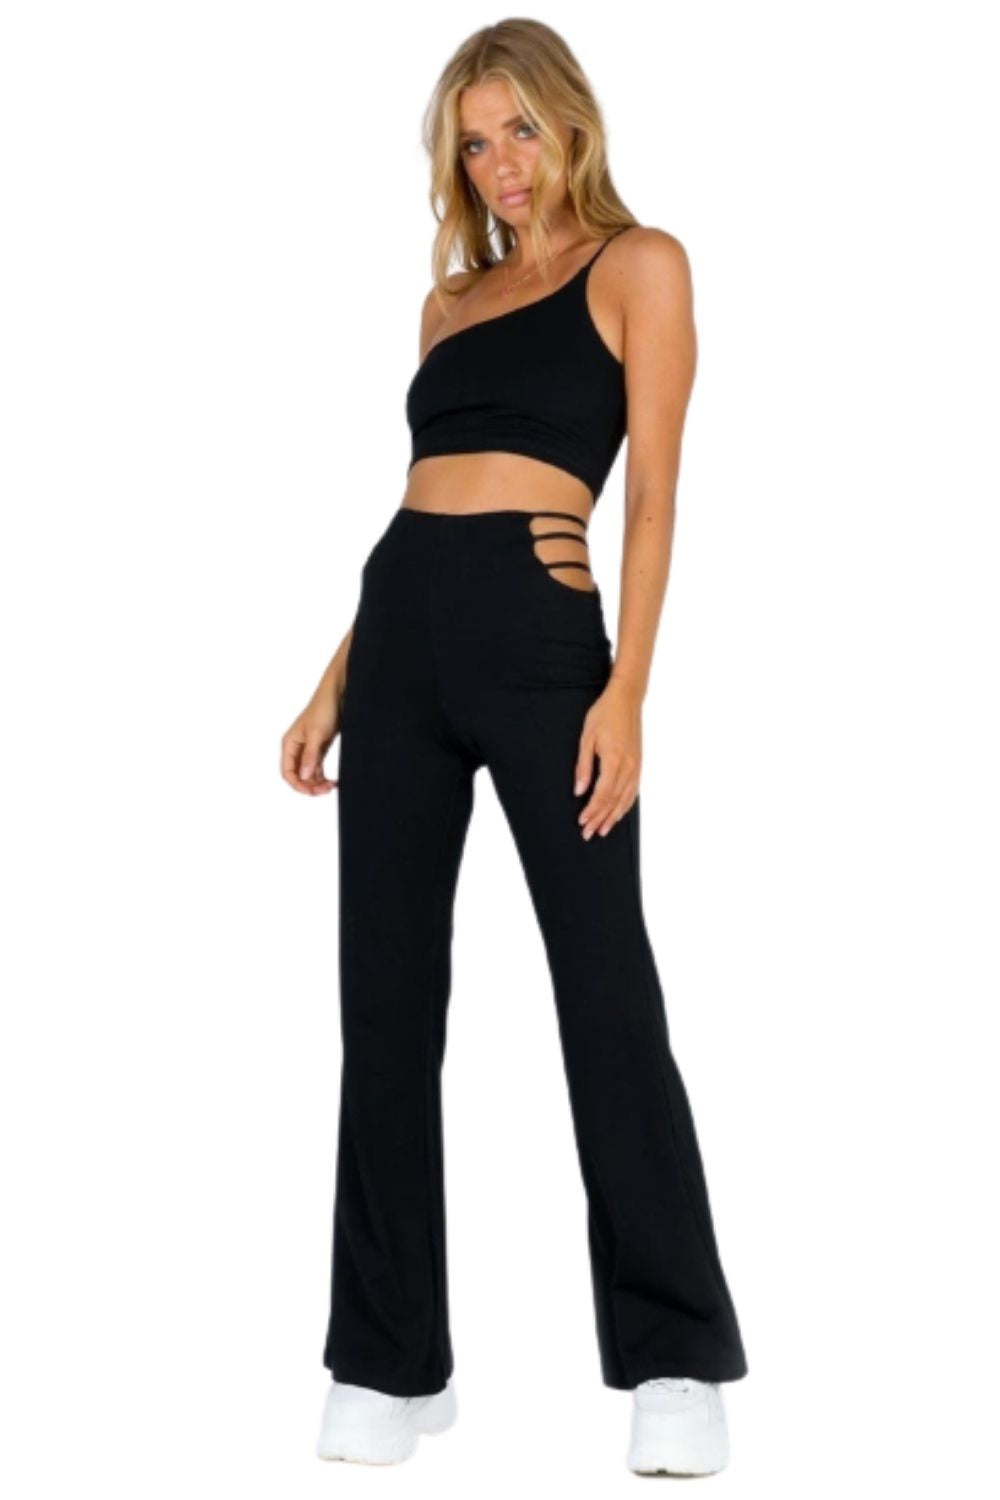 Black Trouser In Lycra With One SIde Cut Out Waist – Styched Fashion